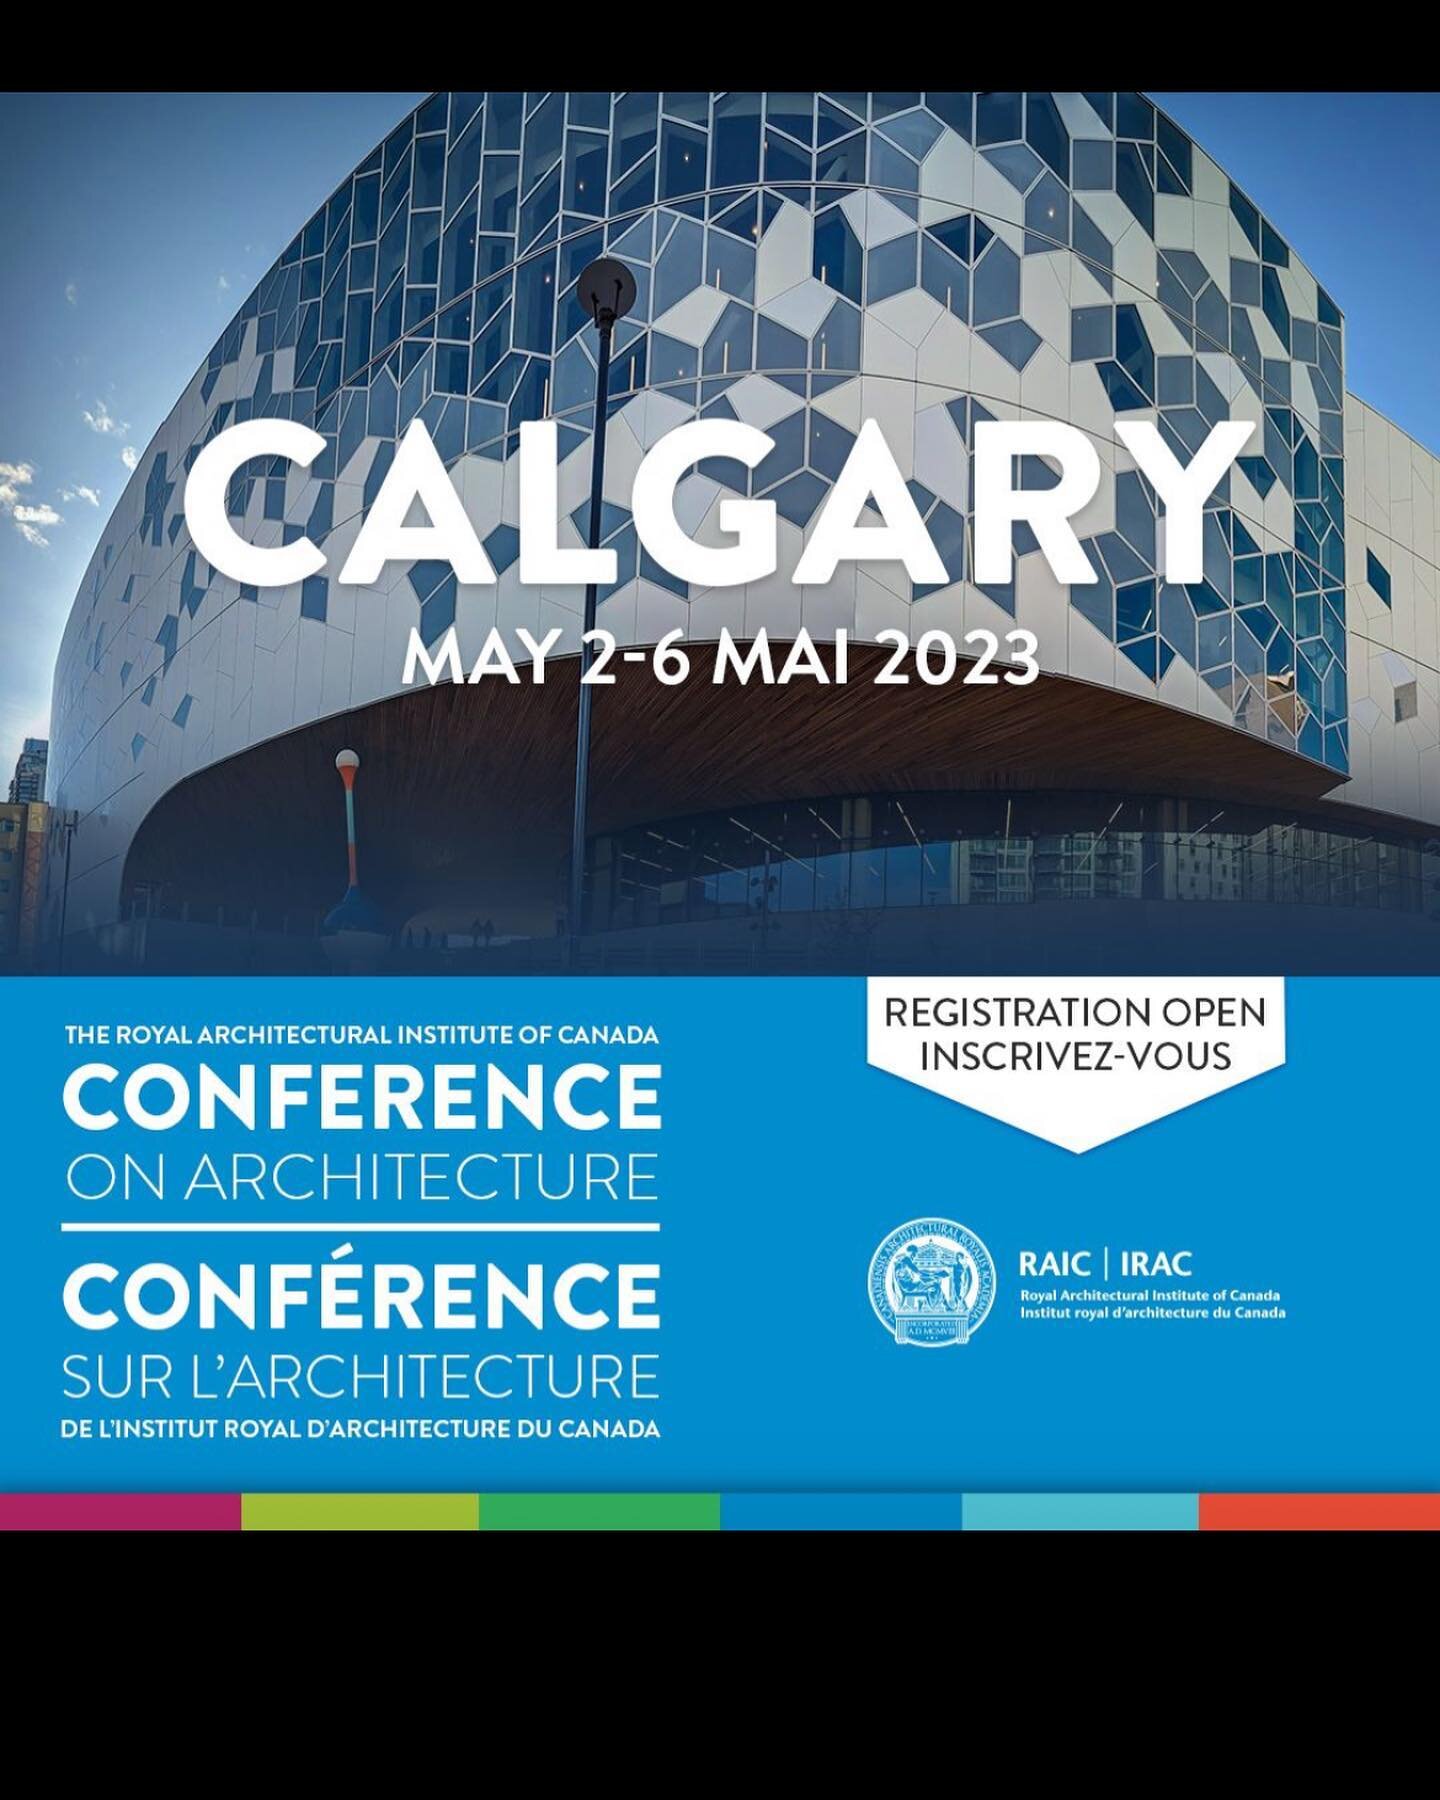 The RAIC Conference kicks off Today!! Great opportunity to check out what is going on in and around the city of Calgary. From the East Village master plan to the Four Corners Community Center projects. @ucalgarysapl will also be in attendance promoti